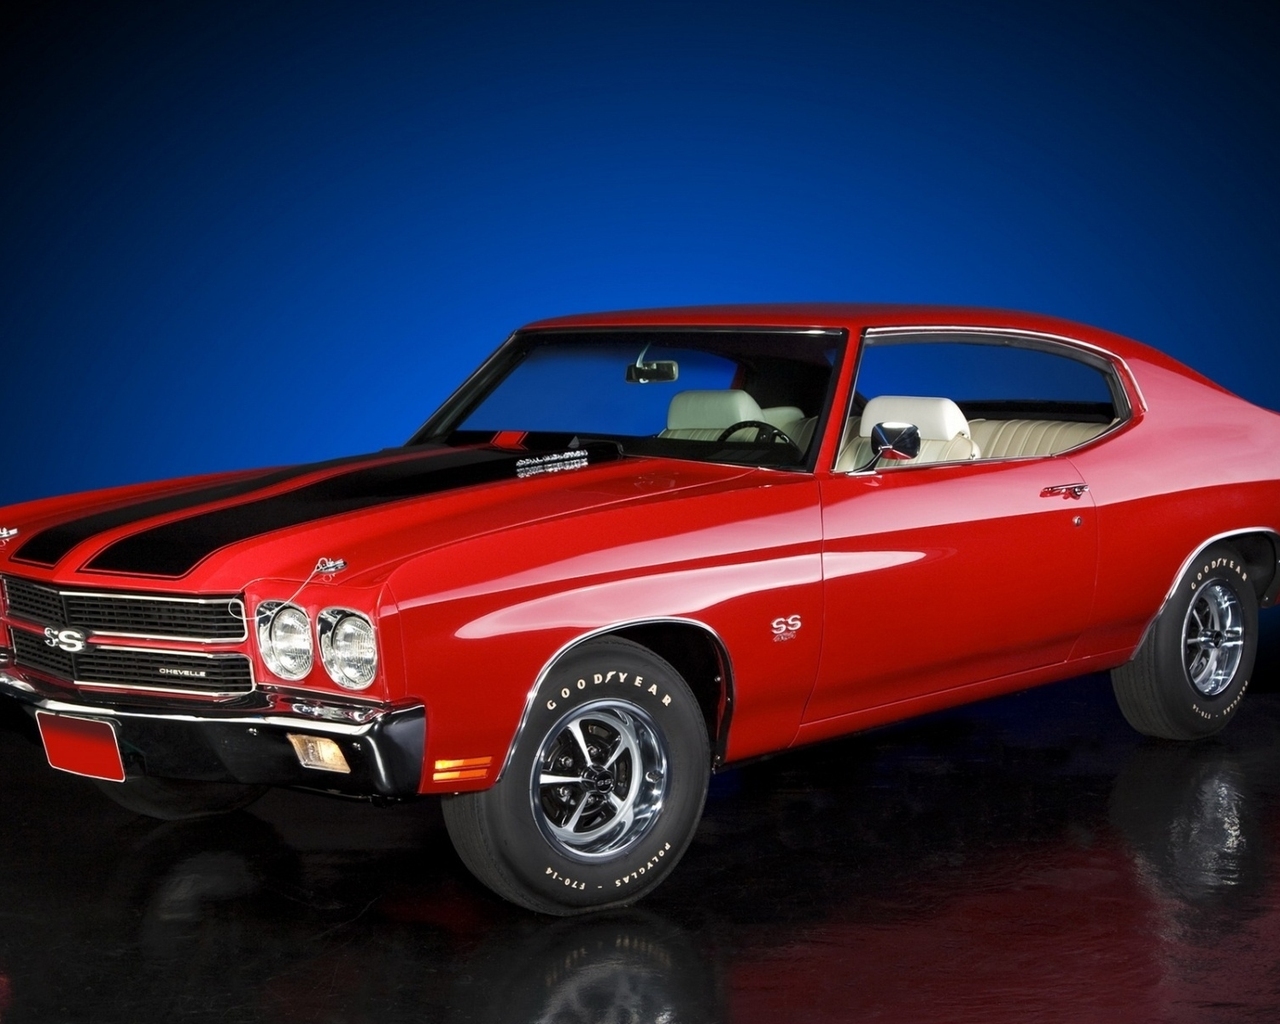 1970 chevelle ss 454 wallpaper Car Tuning 1280x1024